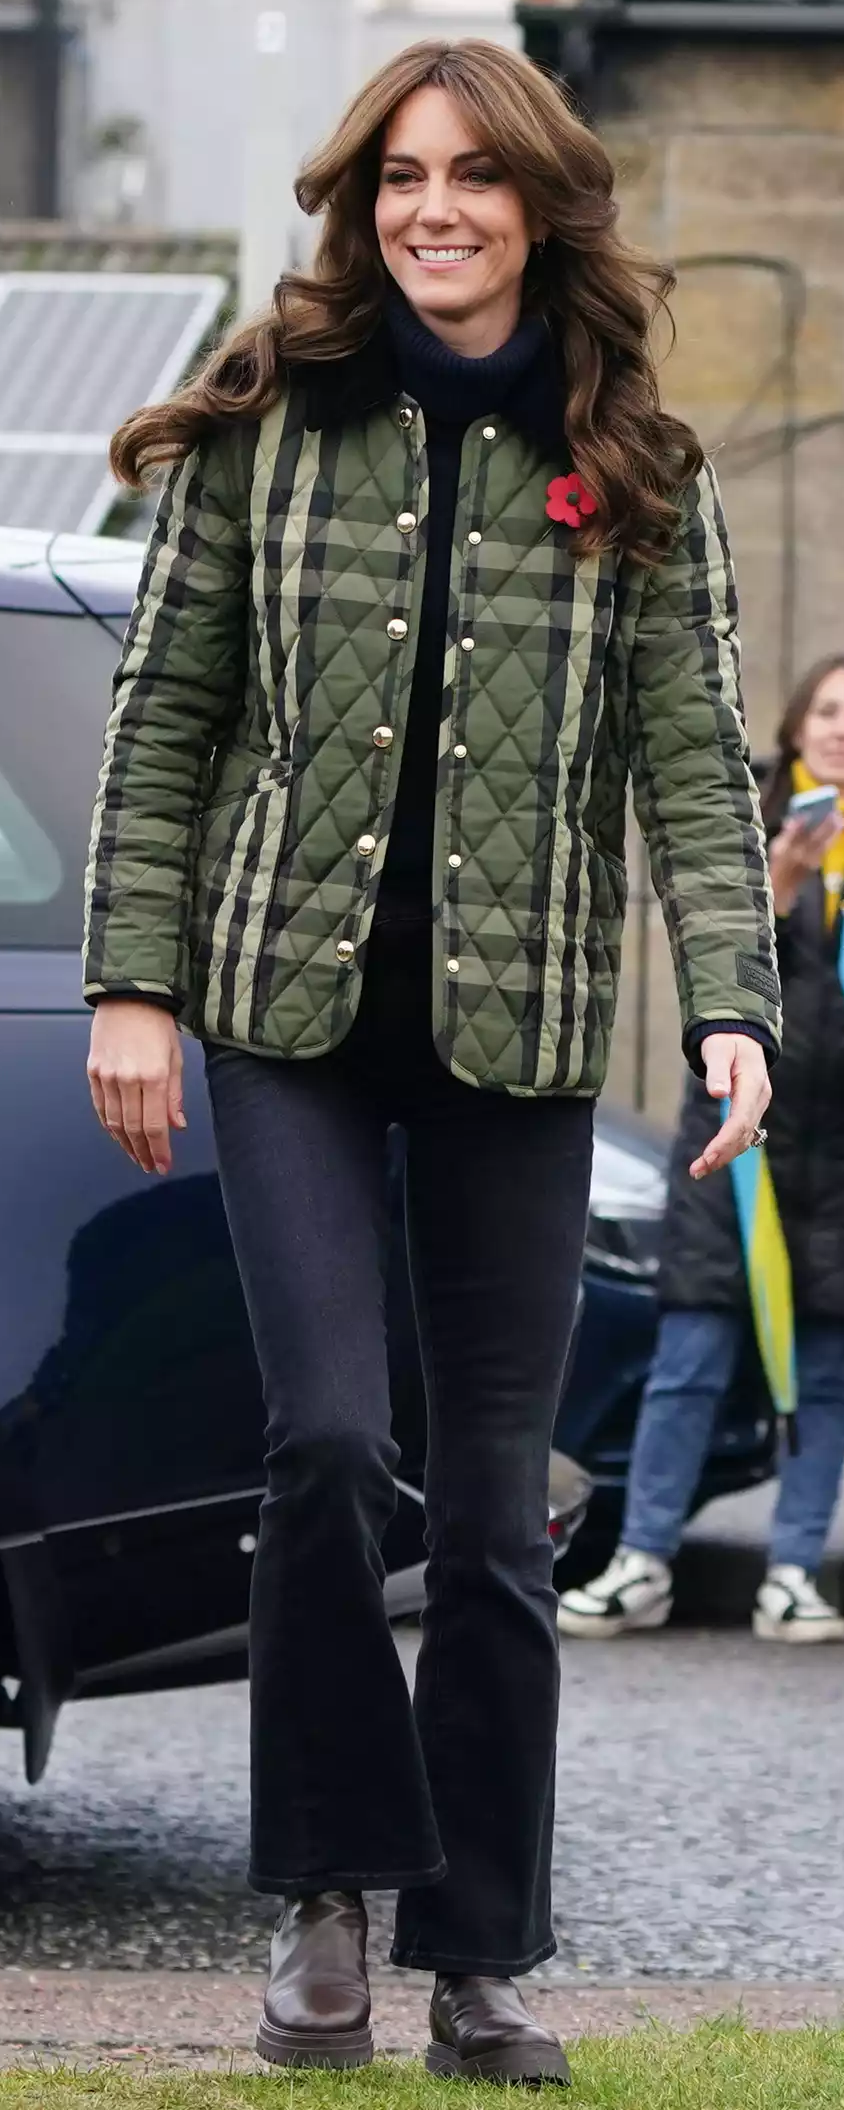 Burberry Corduroy Collar Diamond Quilted Jacket in Green as seen on Kate Middleton, Princess of Wales